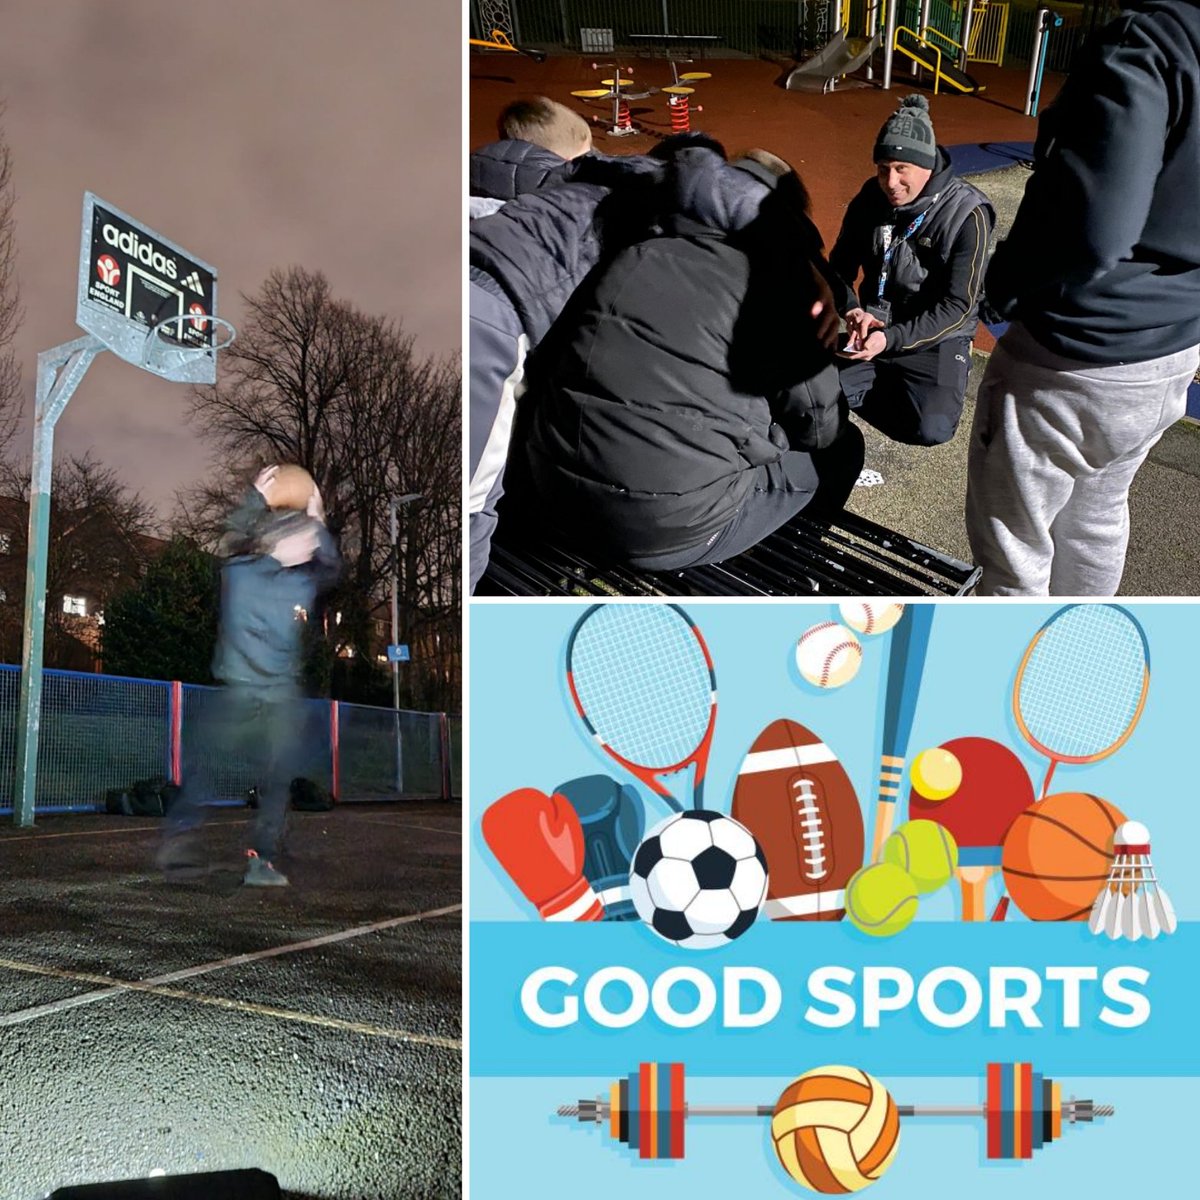 Our team have been out in Halton for the start of the 6 week sport programme. Over the next 6 week our team and sports coach will be getting young people active with different sports. ⚽️ 🥅 🏟 🏈 #leeds #vru @wy_vru @JessJen_VRU @LeedsCommFound